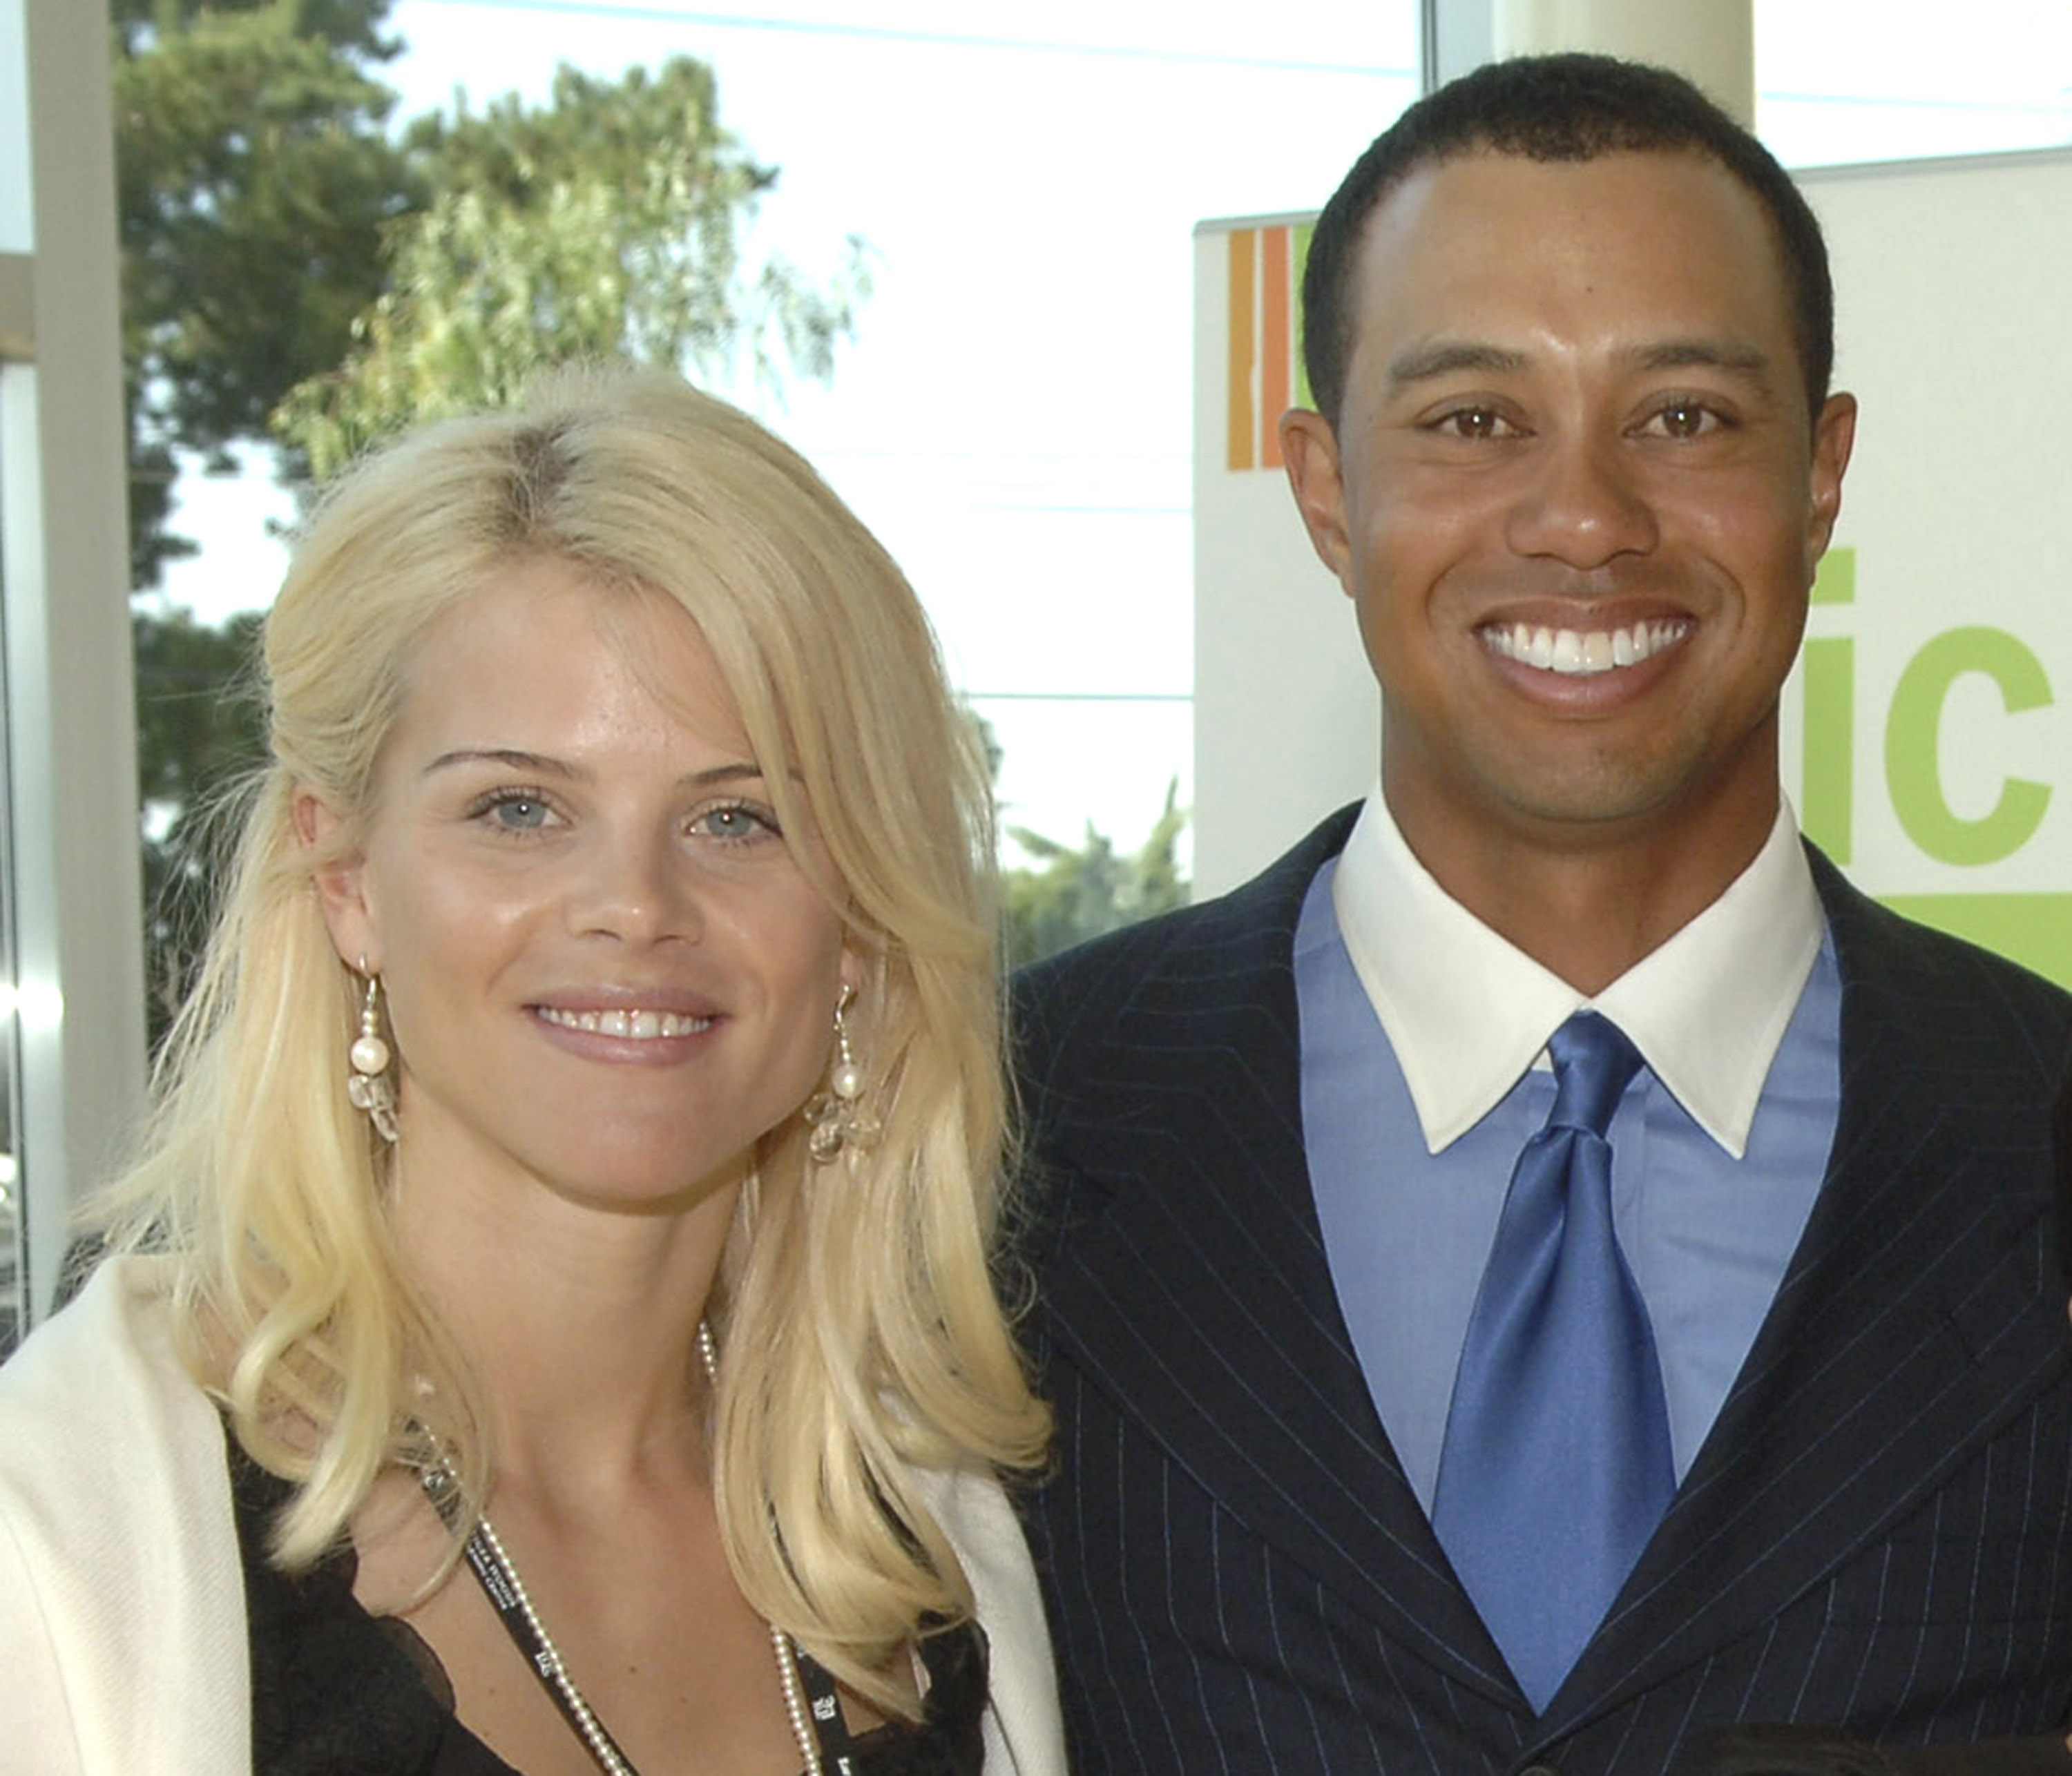 Elin Nordegren and Tiger Woods smile on February 10, 2006. | Source: Getty Images